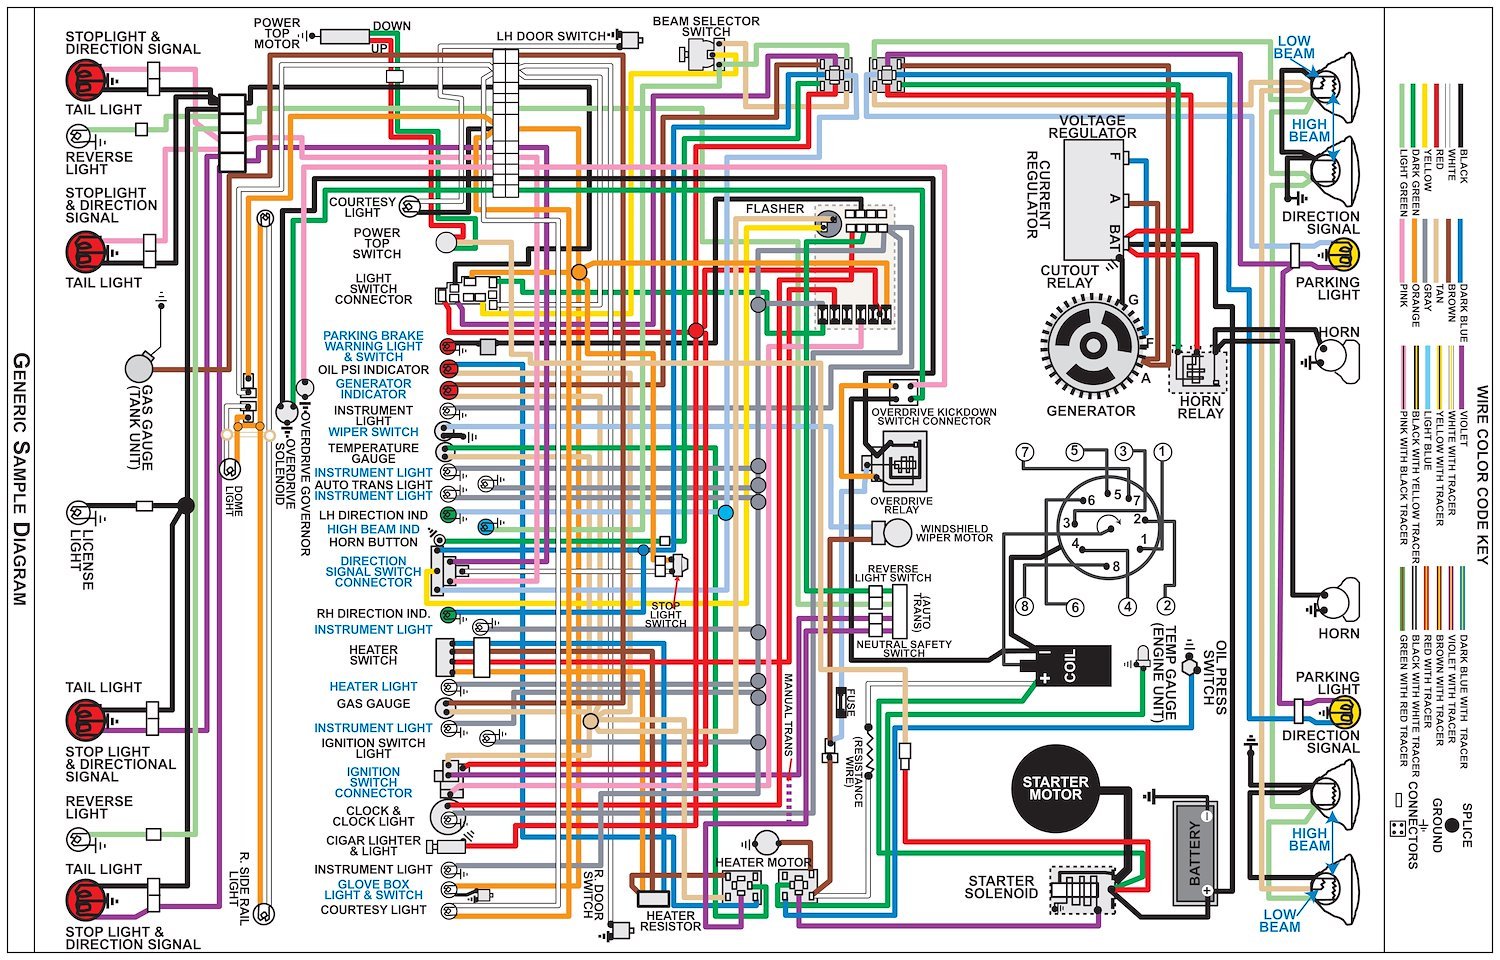 Wiring Diagram for 1973 Dodge Challenger with Standard